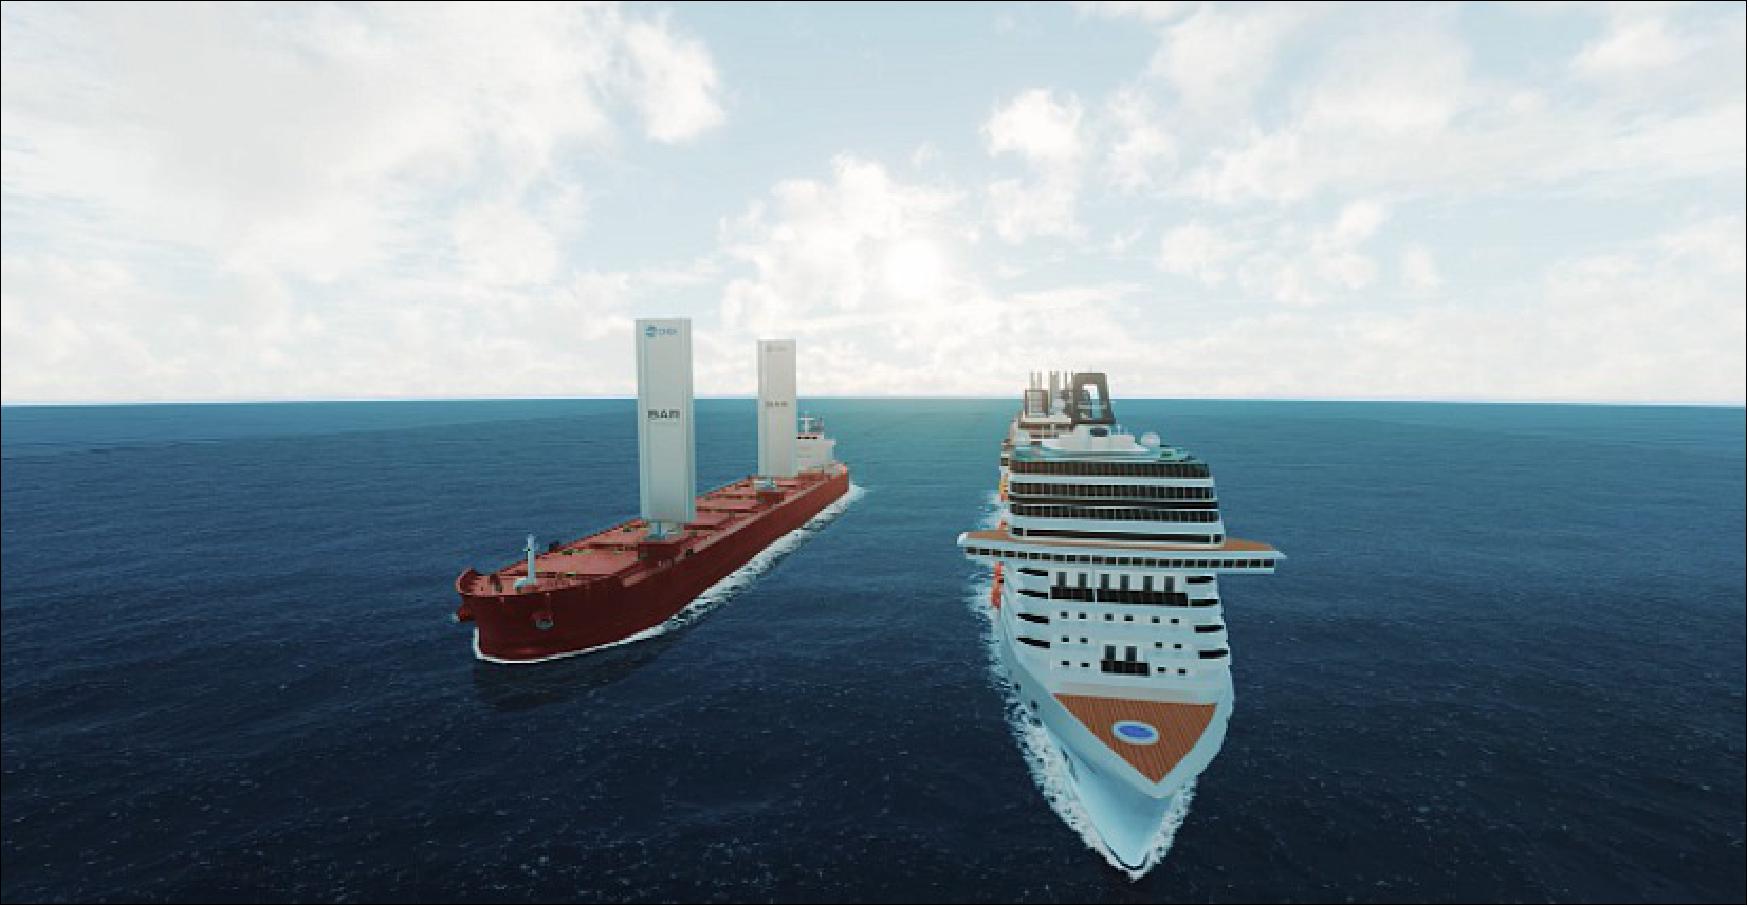 Figure 115: EU-funded project to harness key technologies for shipping’s decarbonisation (image credit: VPO)